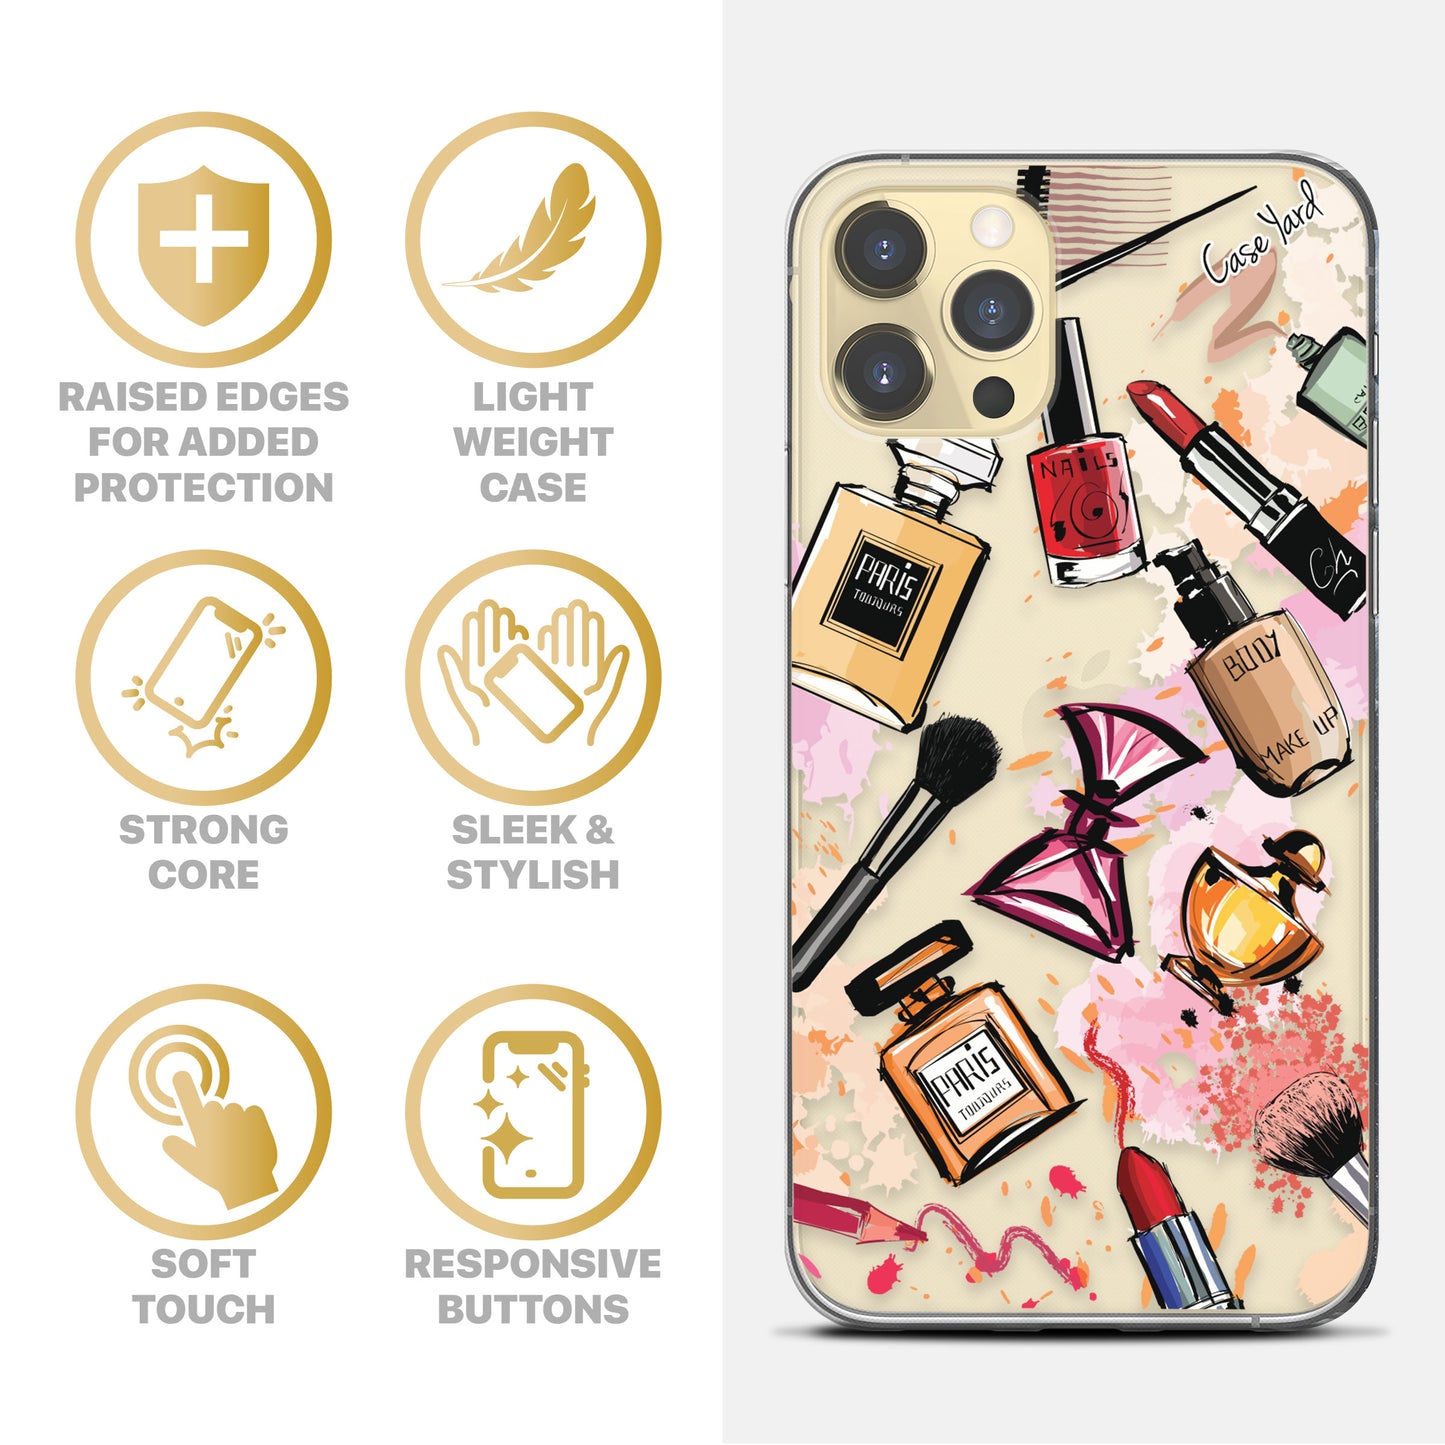 TPU Clear case with (Make Up Case) Design for iPhone & Samsung Phones